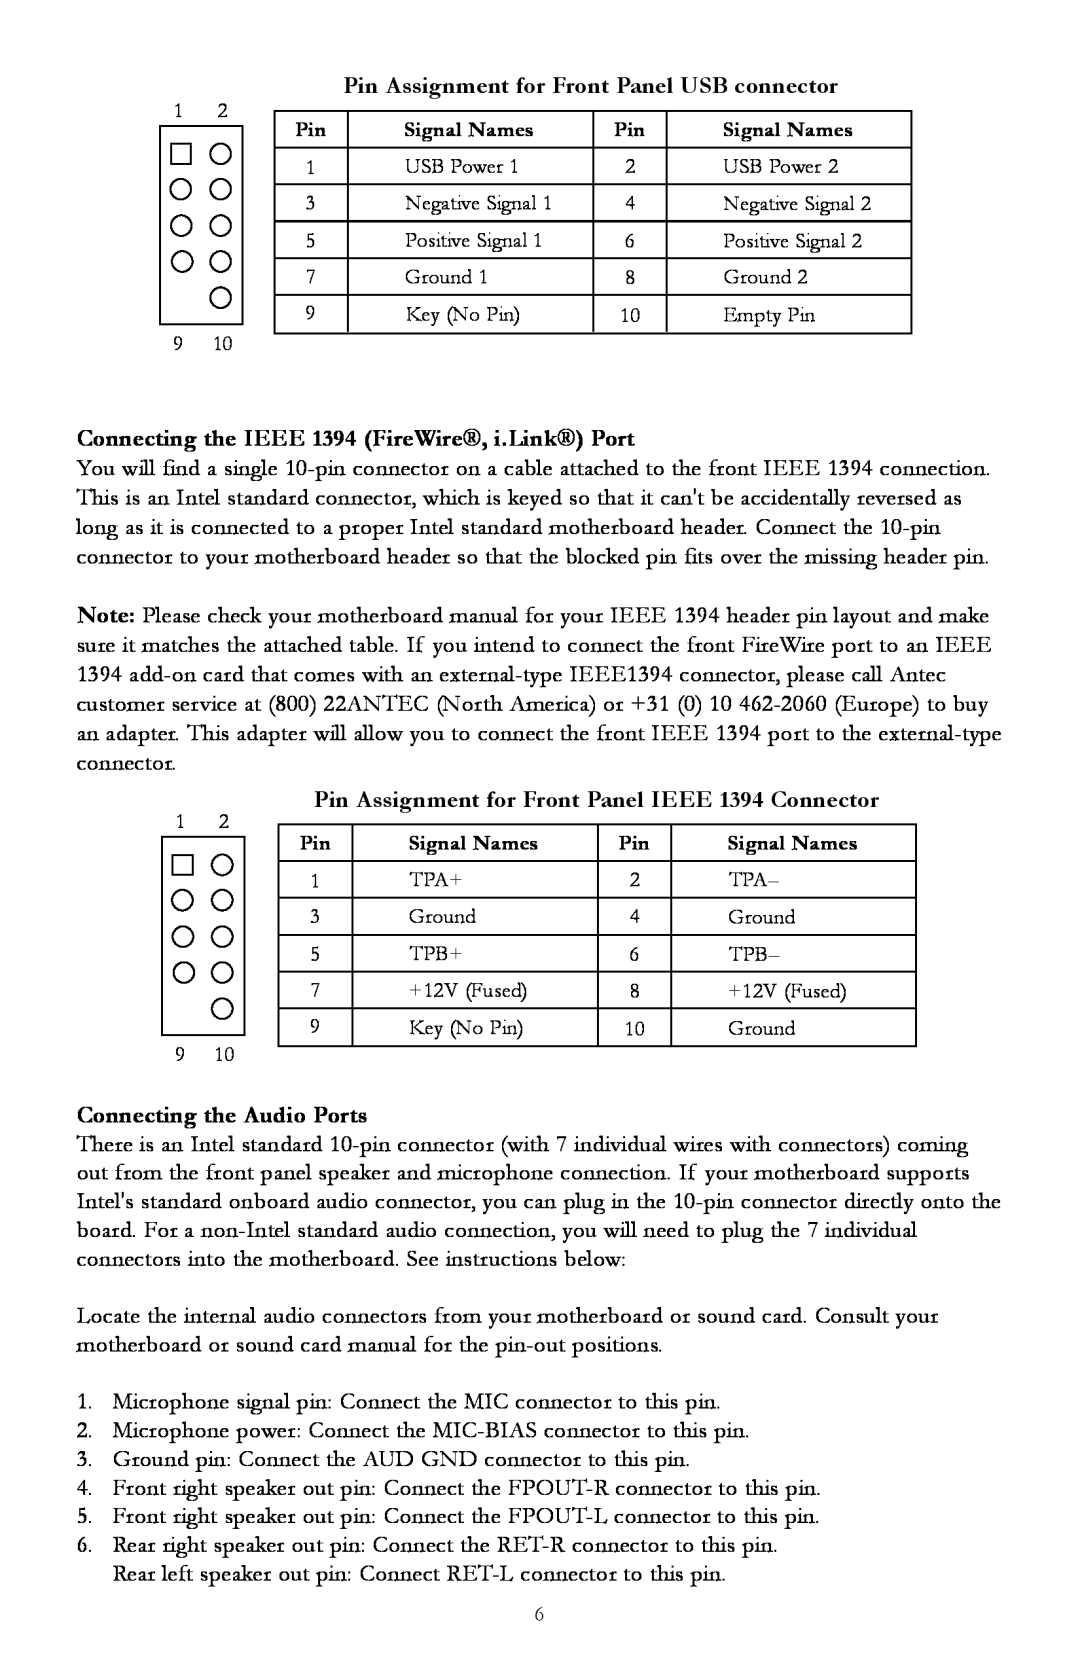 Antec P150 user manual Pin Assignment for Front Panel USB connector, Connecting the IEEE 1394 FireWire, i.Link Port 